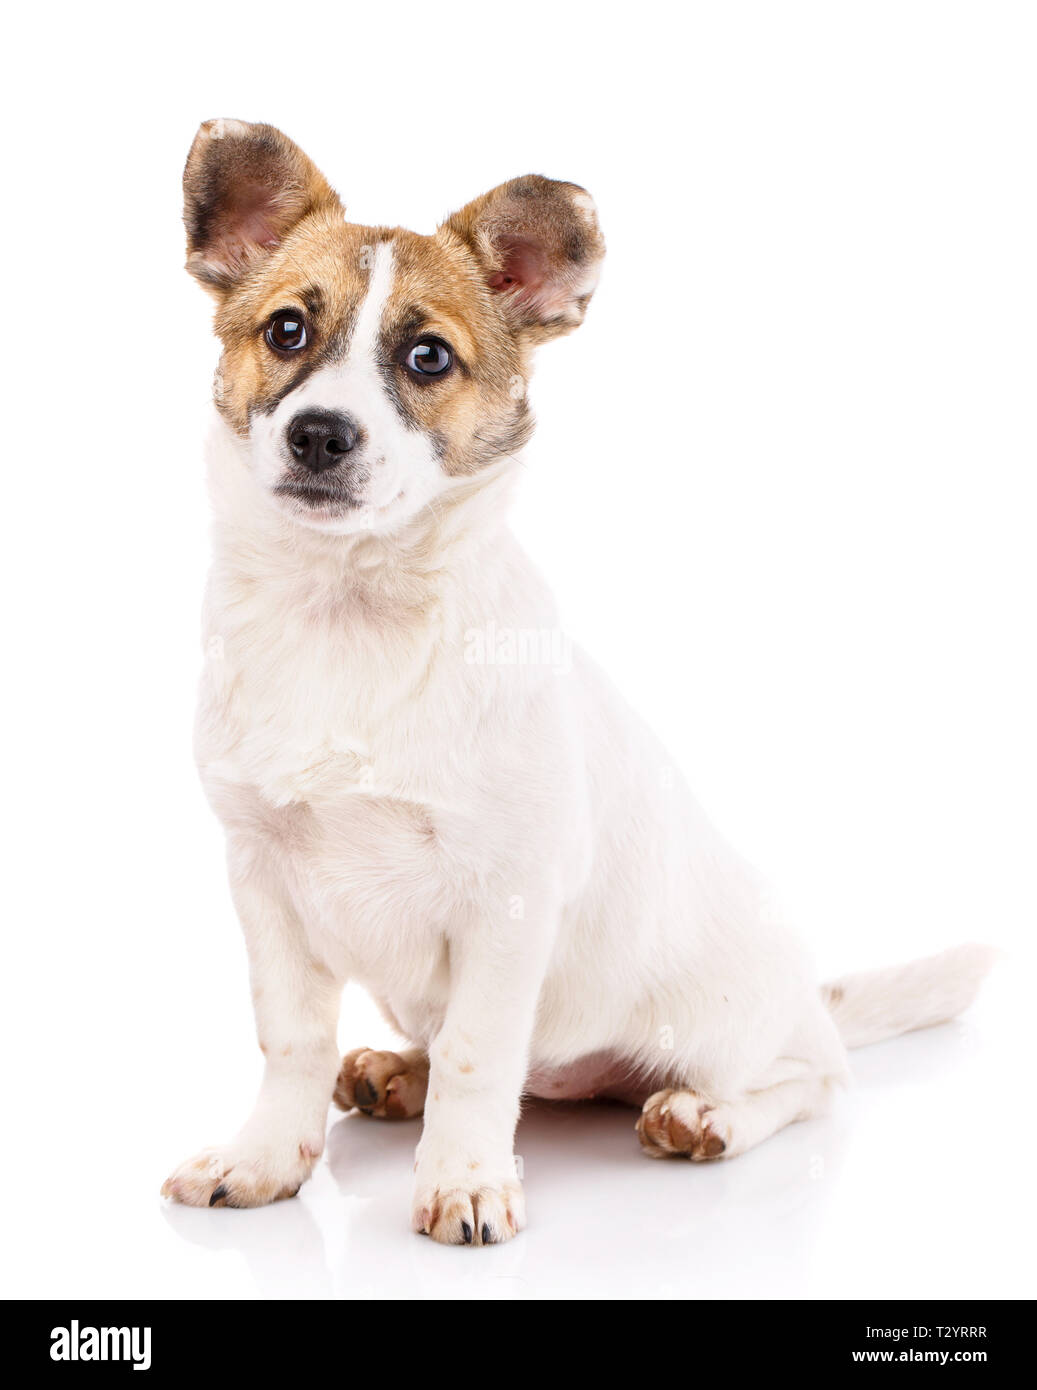 A dog with round ears sitting on a white background. As New Year's postcard design element Stock Photo